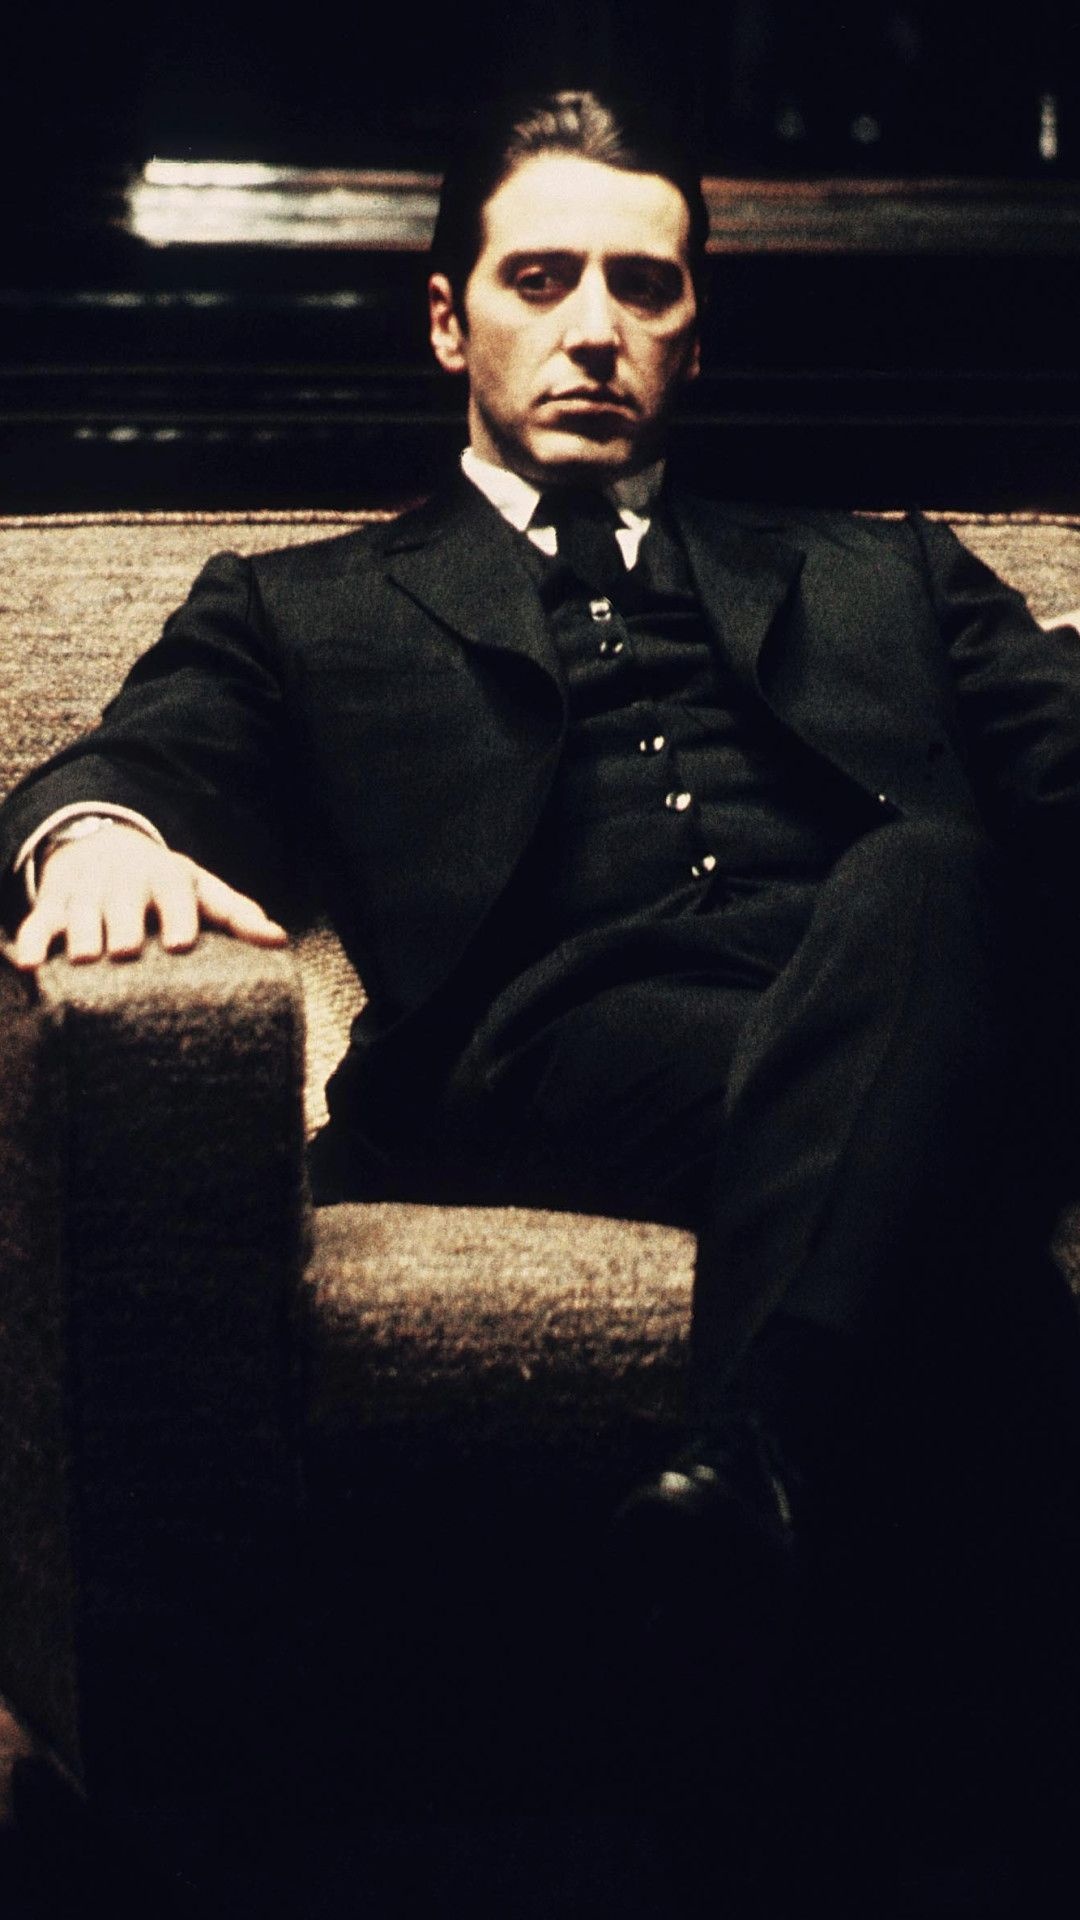 Michael Corleone, Godfather tribute, Striking iPhone wallpapers, Iconic imagery, 1080x1920 Full HD Handy